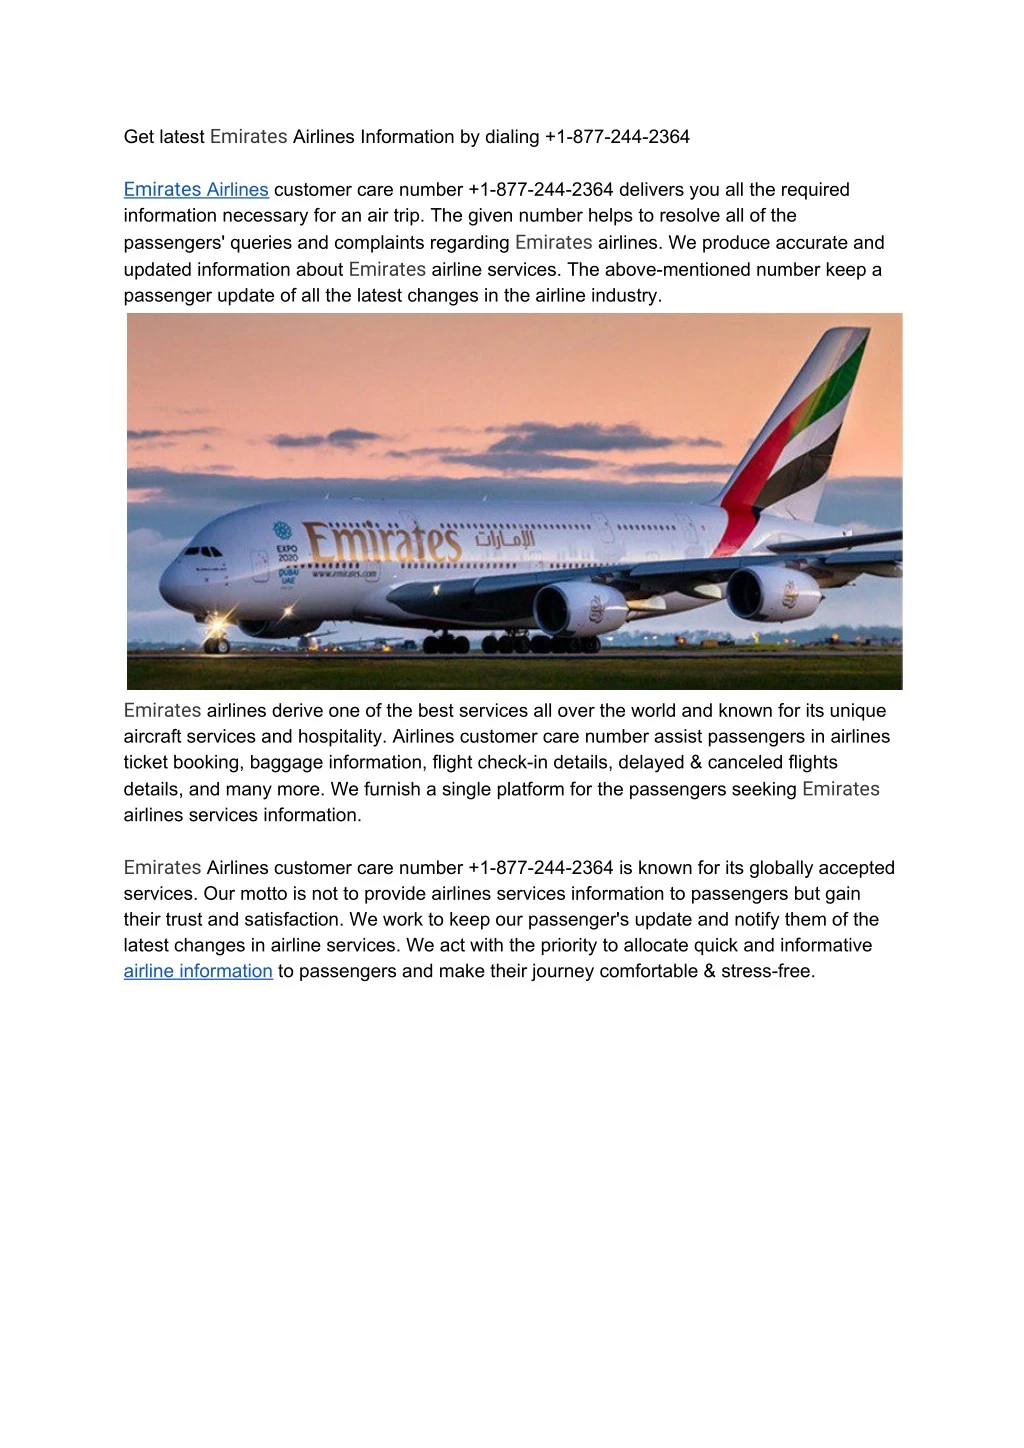 get latest emirates airlines information